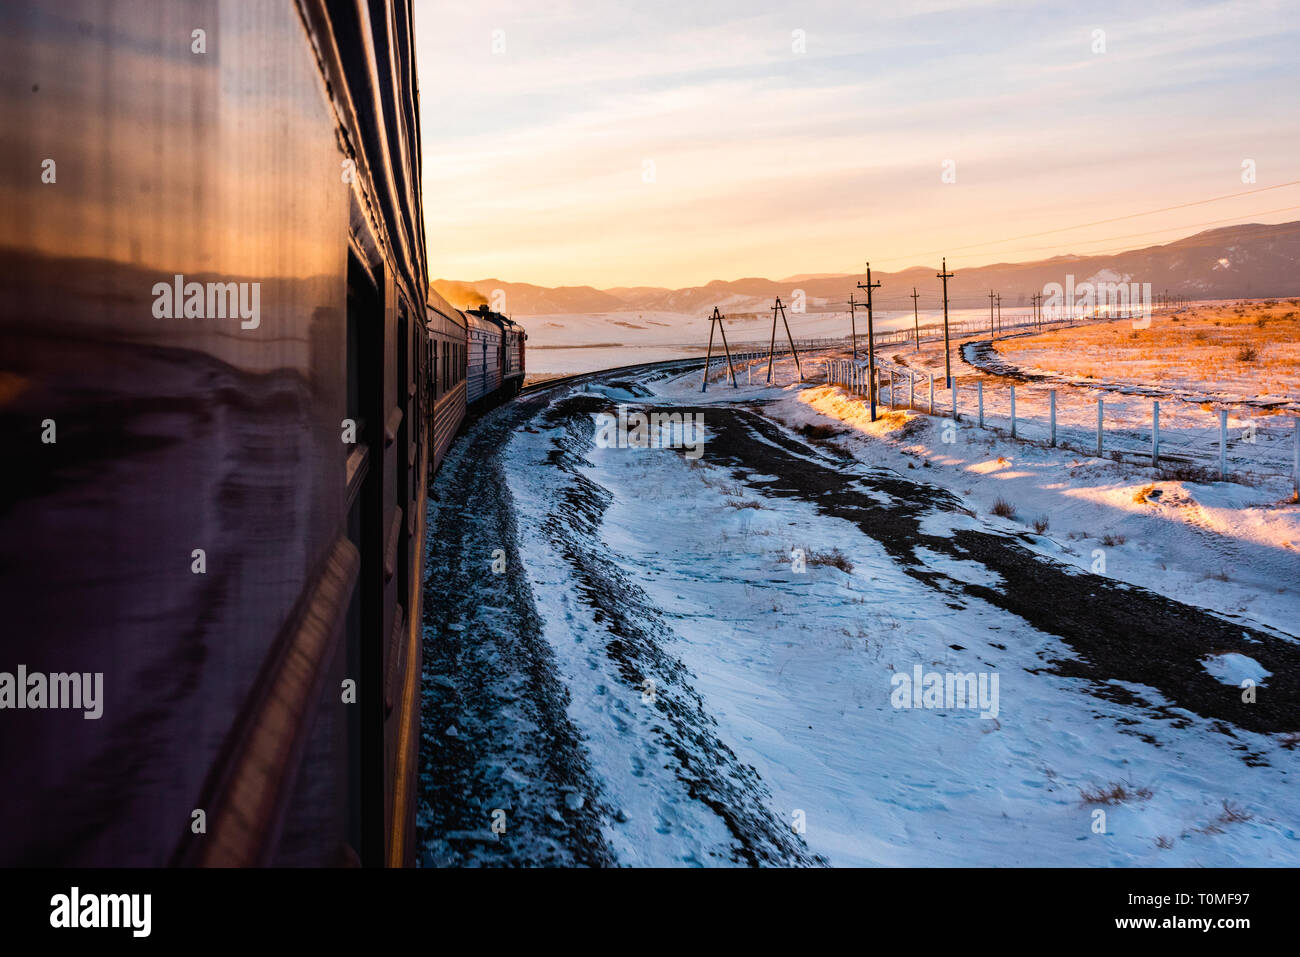 Trans-Siberian Railway during the trip in winter with sunset atmosphere, Siberia, Russia Stock Photo